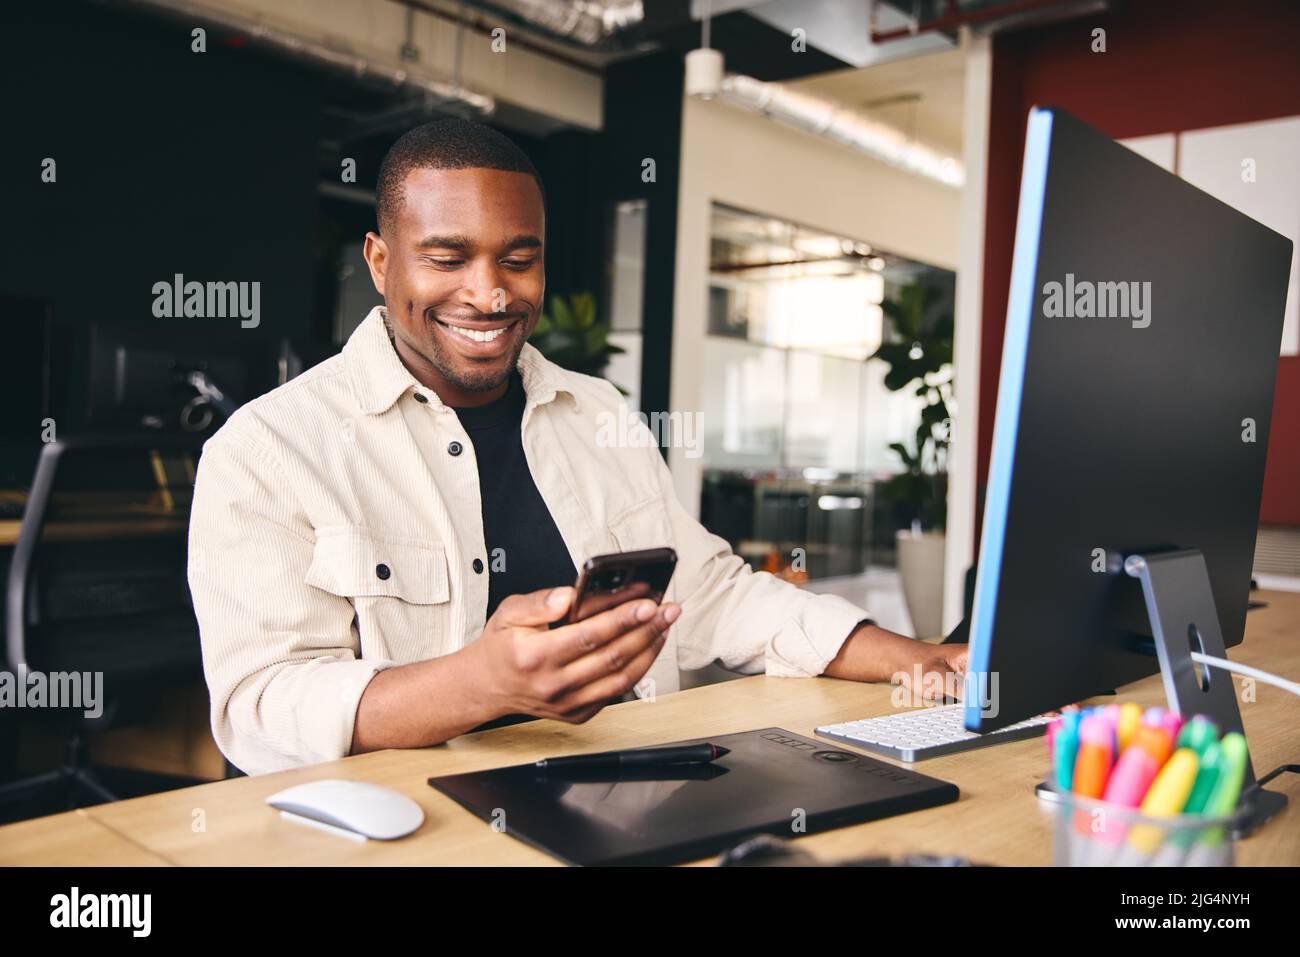 Young Black Male Advertising Marketing Or Design Creative In Modern Office Sitting At Desk Using Mobile Phone Stock Photo